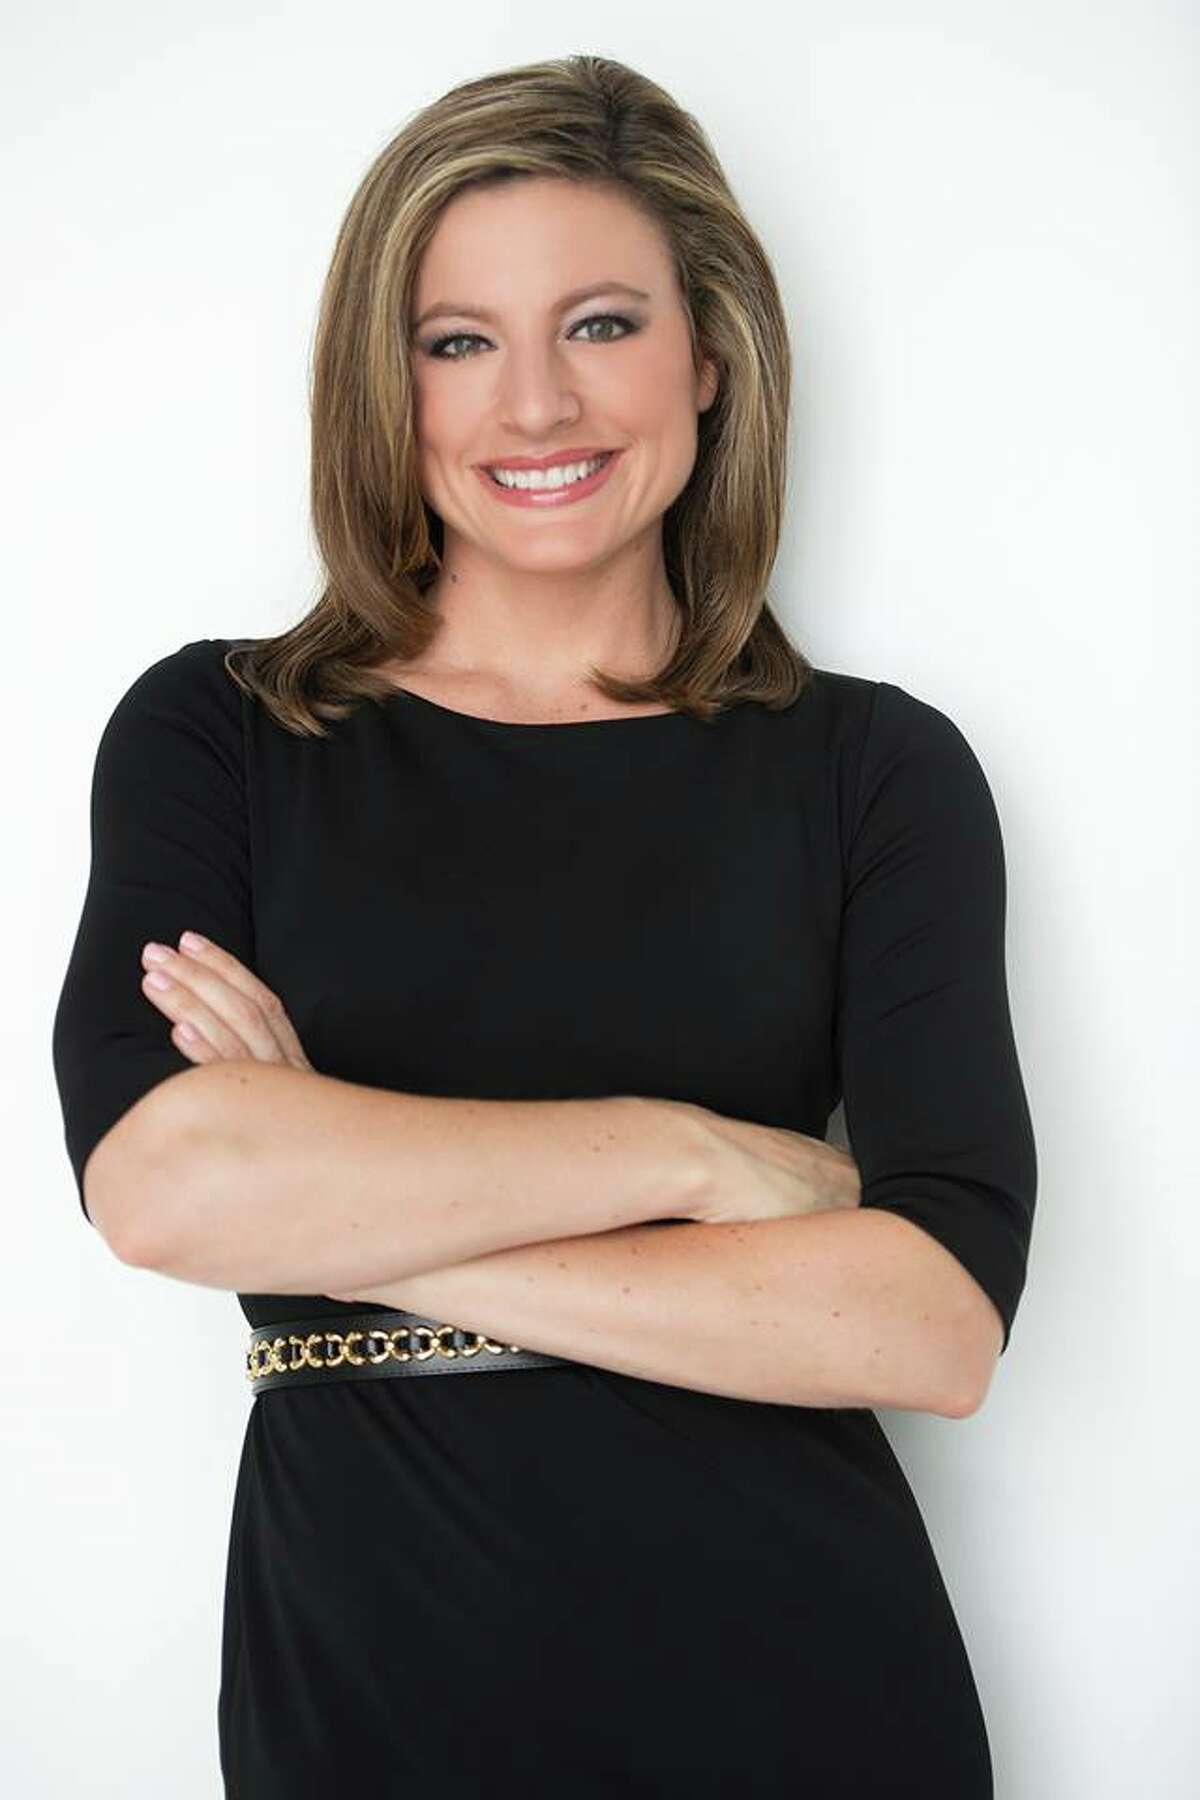 Anne McCloy is the 5 and 5:30 p.m. news anchor for CBS 6 News Albany, on weekdays right after Ellen. She also files daily and investigative reports.